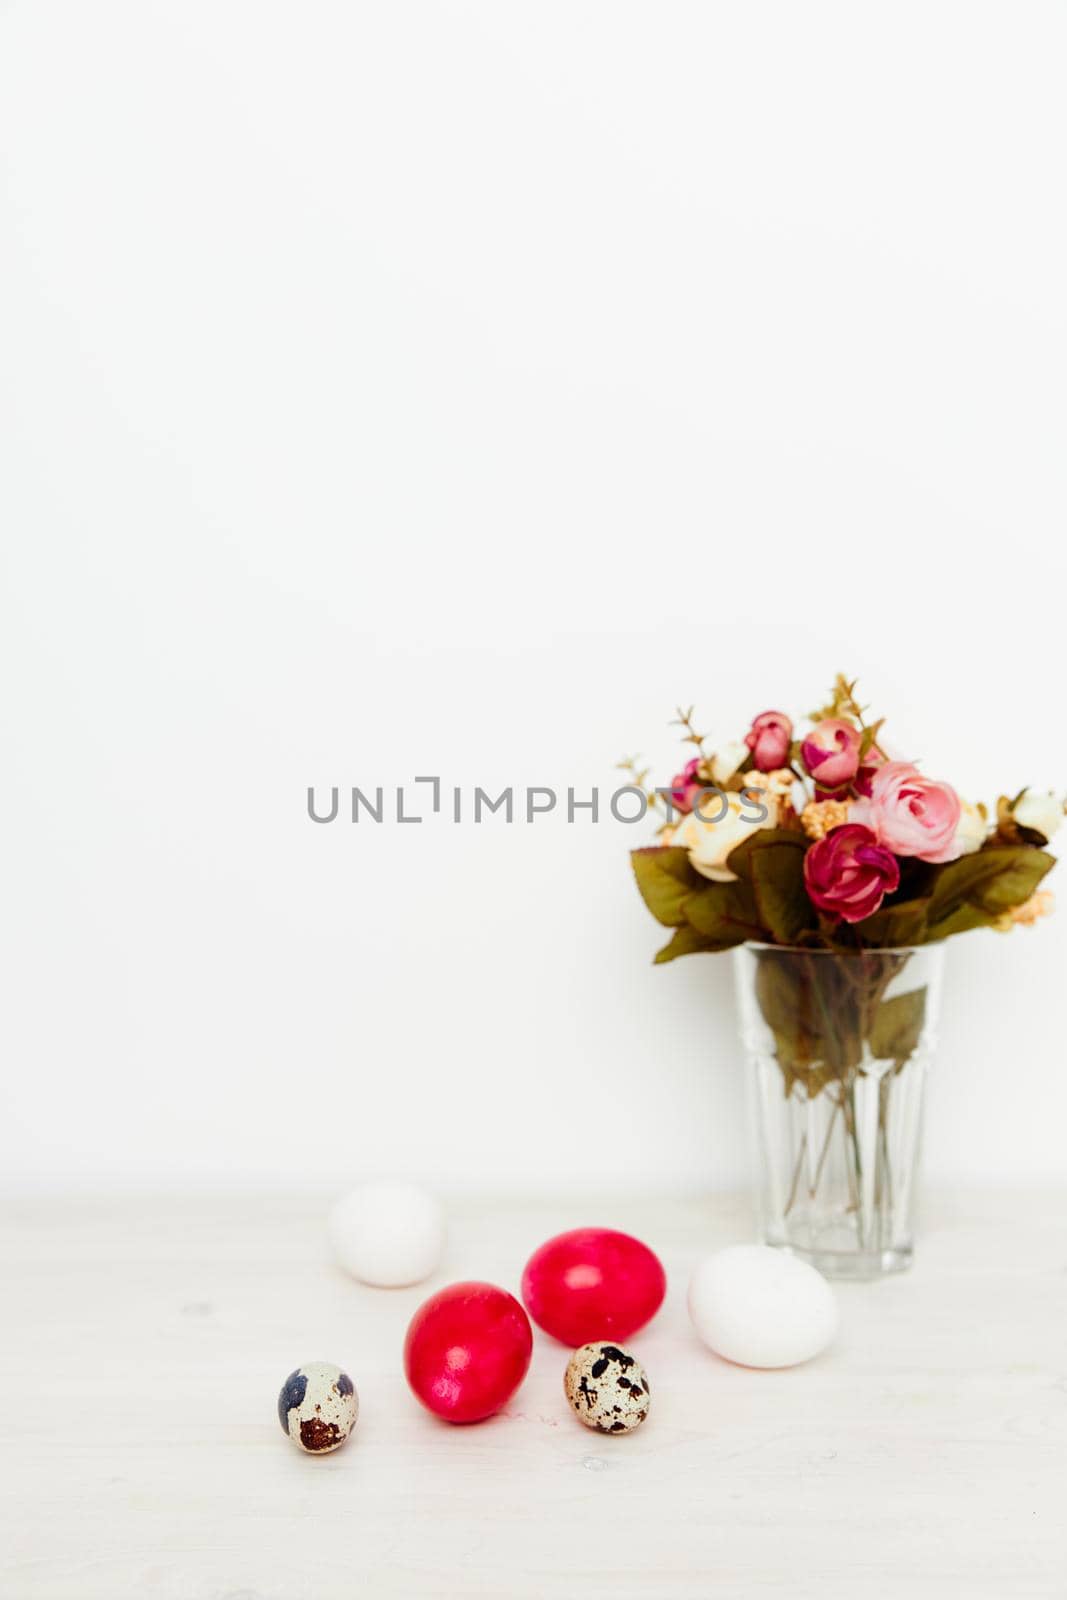 bouquet of fragrant flowers and Easter eggs on a wooden table In a bright room. High quality photo